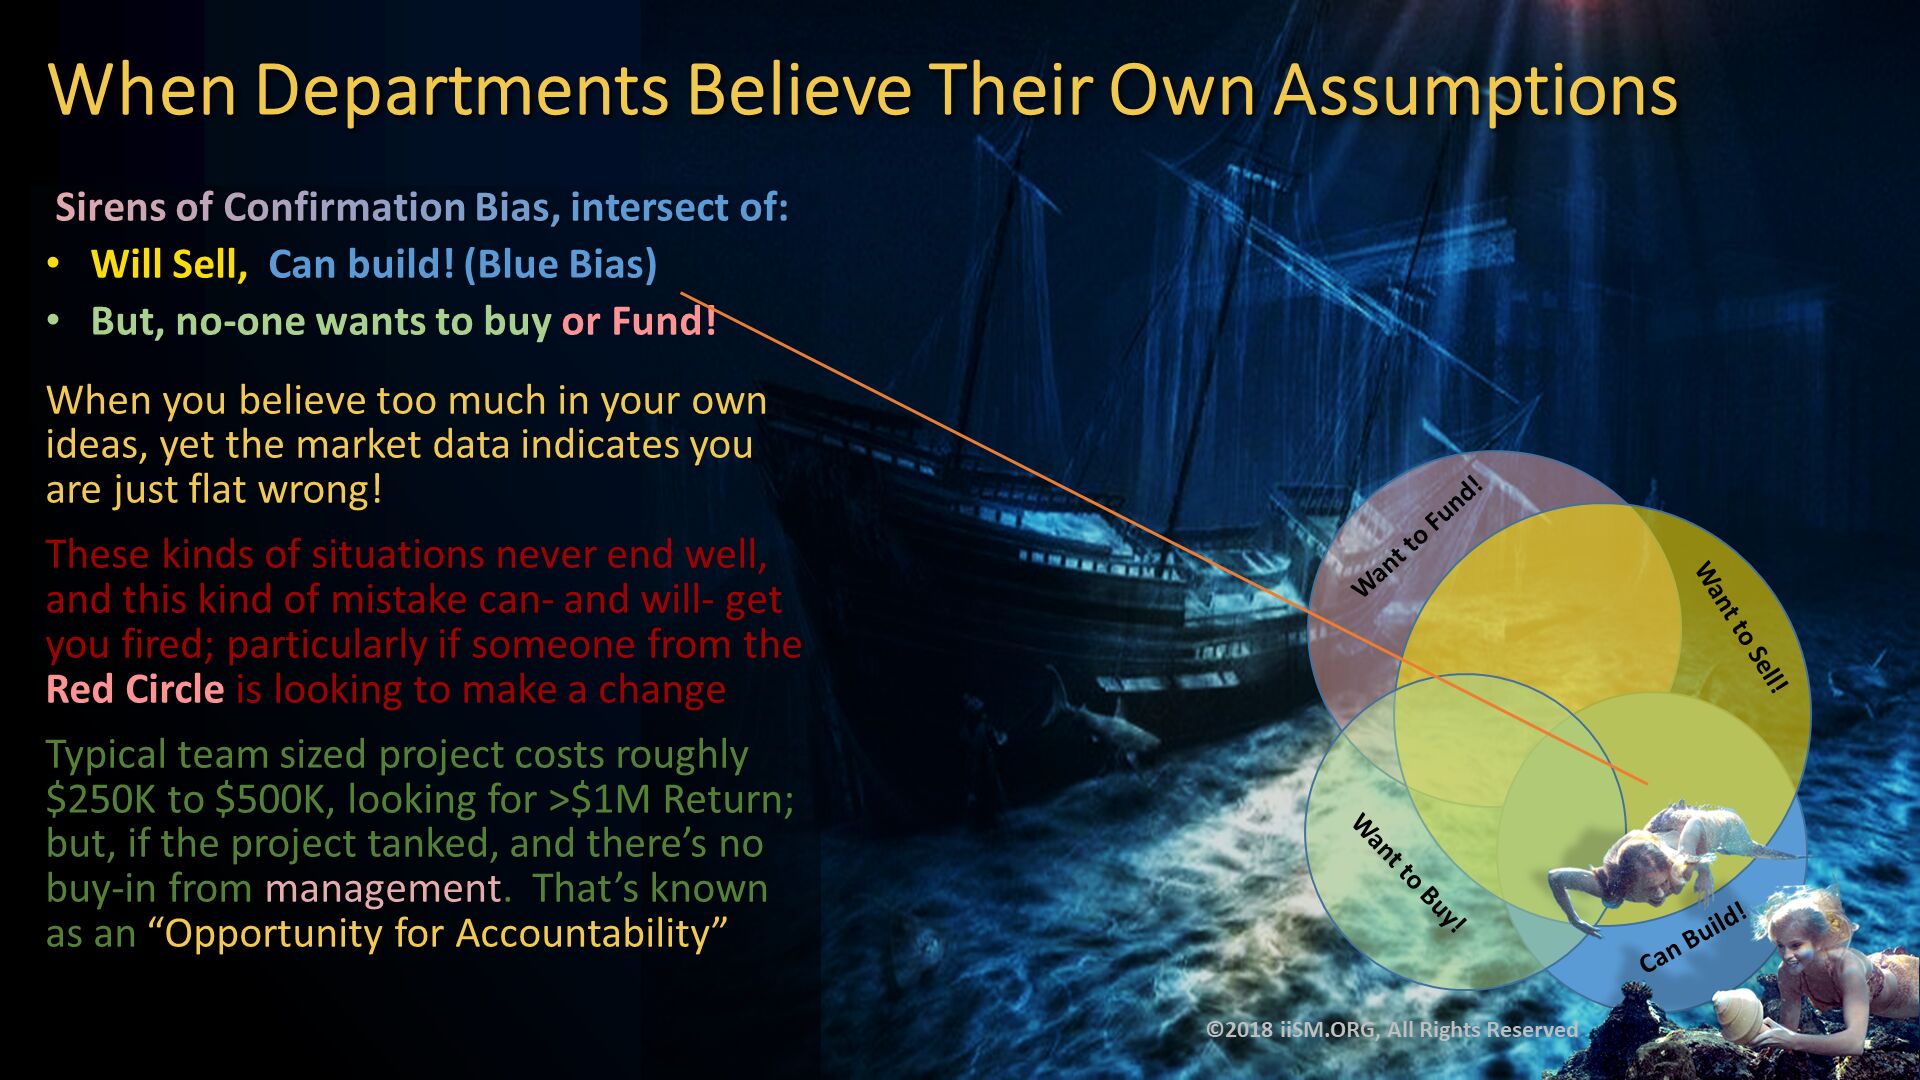 When Departments Believe Their Own Assumptions.  Sirens of Confirmation Bias, intersect of:
Will Sell,  Can build! (Blue Bias)
But, no-one wants to buy or Fund!
When you believe too much in your own ideas, yet the market data indicates you are just flat wrong!
These kinds of situations never end well, and this kind of mistake can- and will- get you fired; particularly if someone from the Red Circle is looking to make a change
Typical team sized project costs roughly $250K to $500K, looking for >$1M Return; but, if the project tanked, and there’s no buy-in from management.  That’s known as an “Opportunity for Accountability”. 